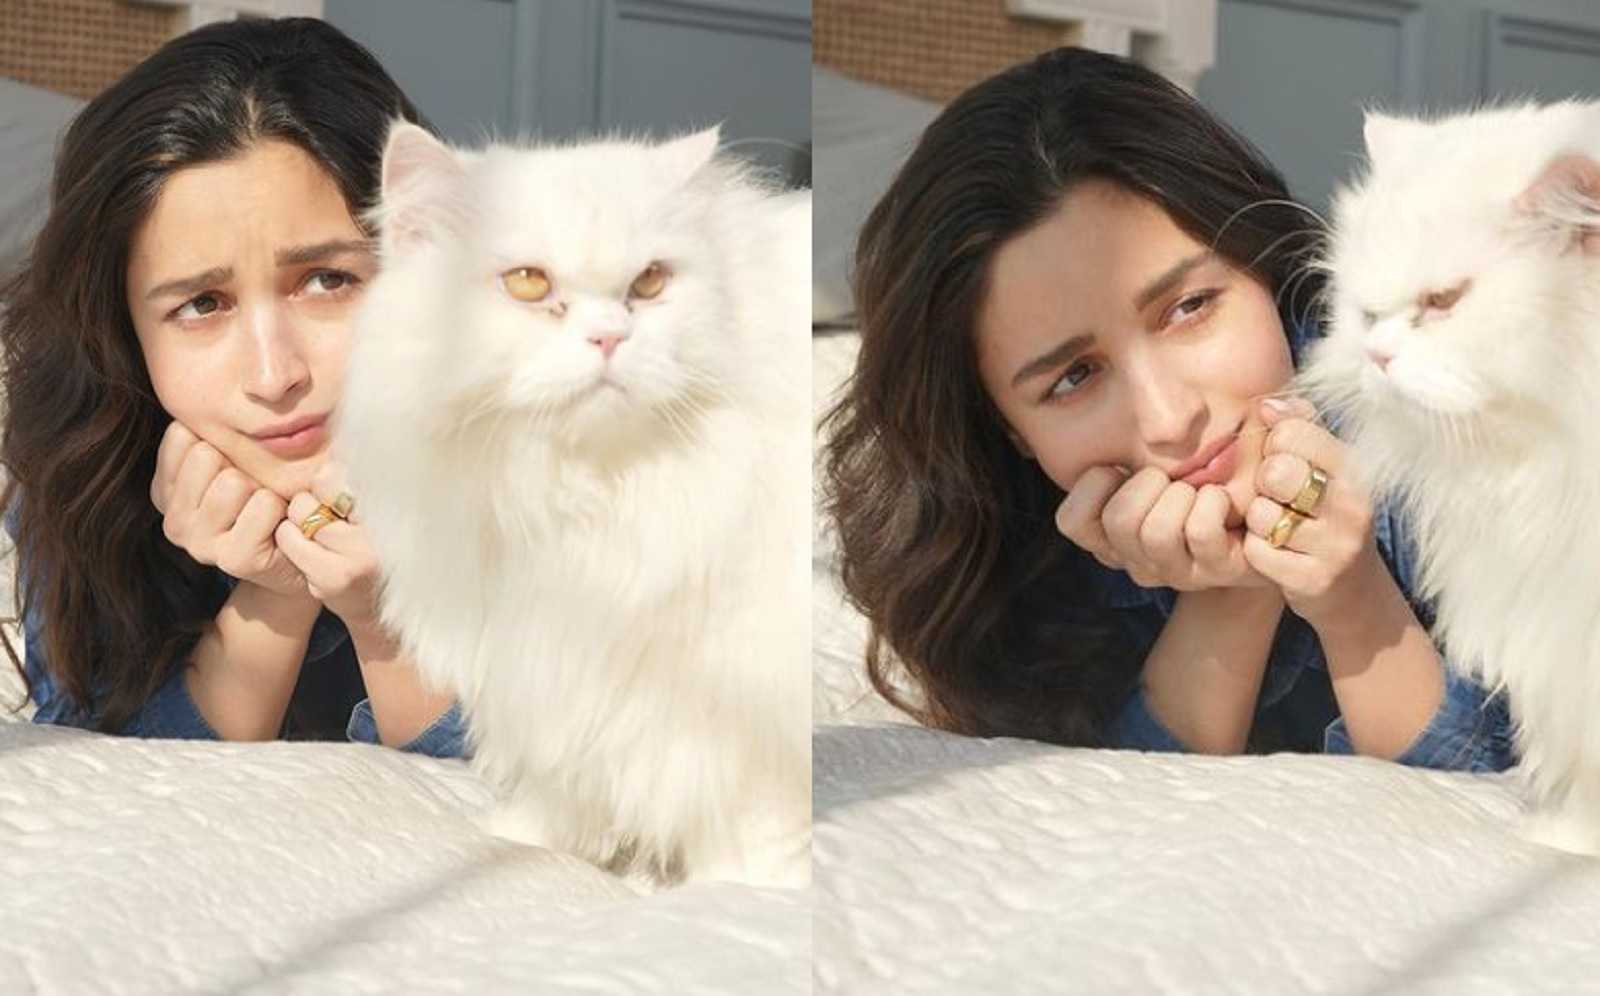 Alia Bhatt's not-so-happy Sunday with her cat Edward ignoring her is too cute to miss; netizens feel Raha Kapoor is the reason